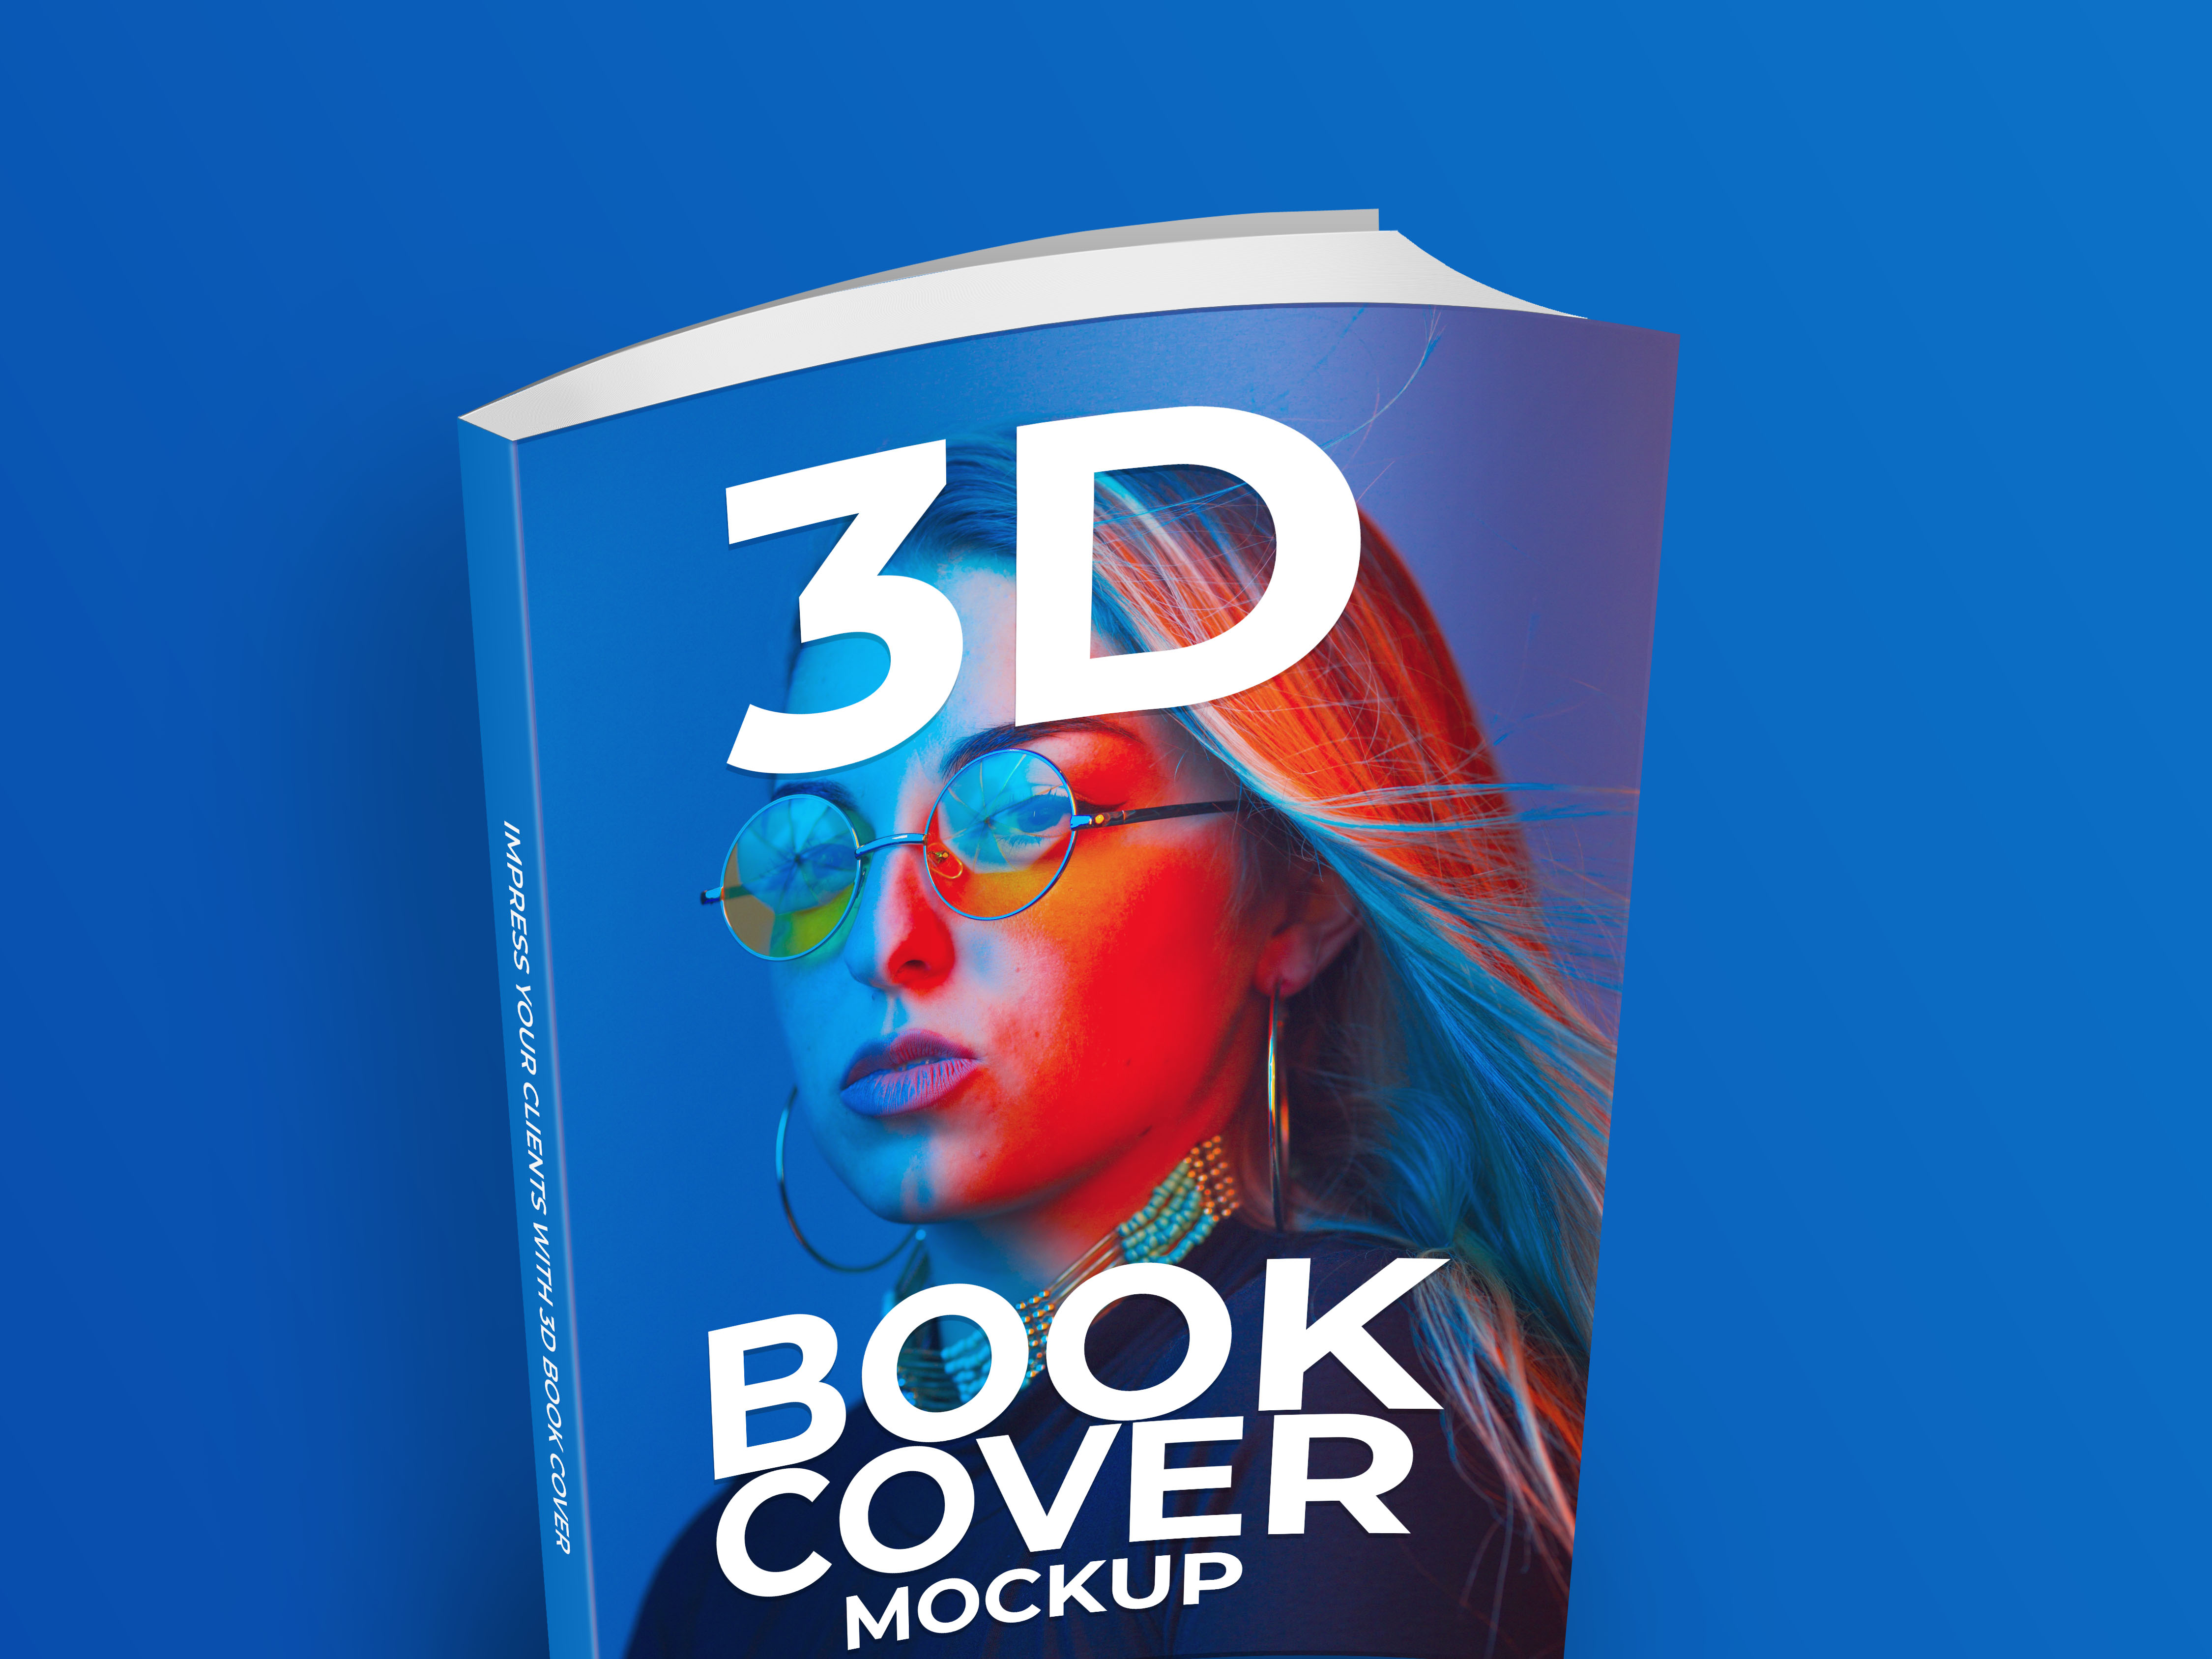 Dribbble 3d_book_cover_mockup_free_psd_download.jpg by Aleena Cooley